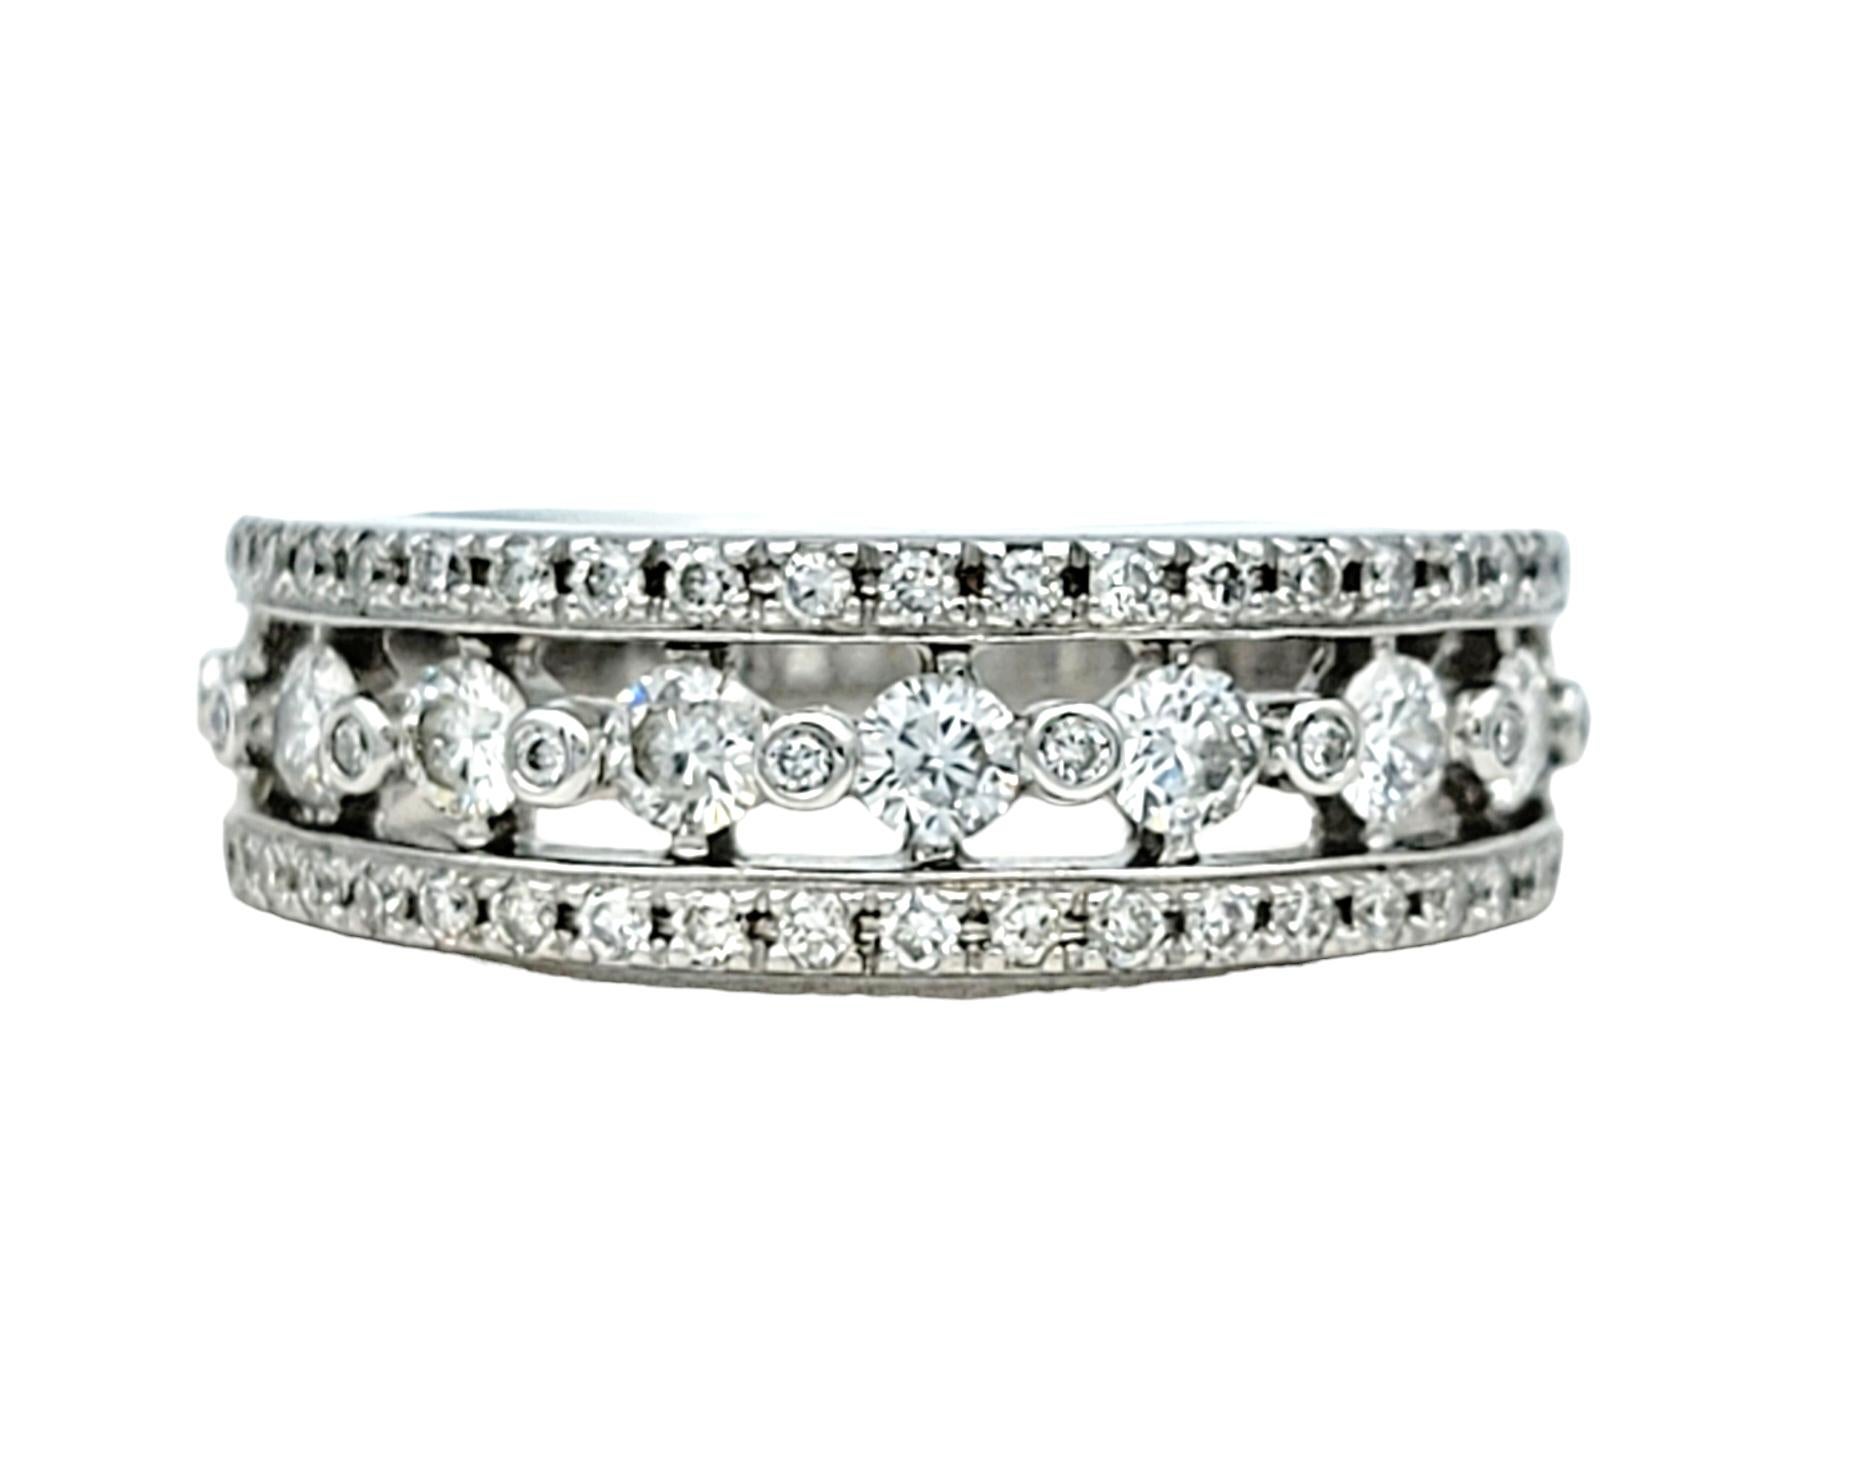 Multi-Row Round Diamond Band Ring Set in Polished 14 Karat White Gold In Good Condition For Sale In Scottsdale, AZ